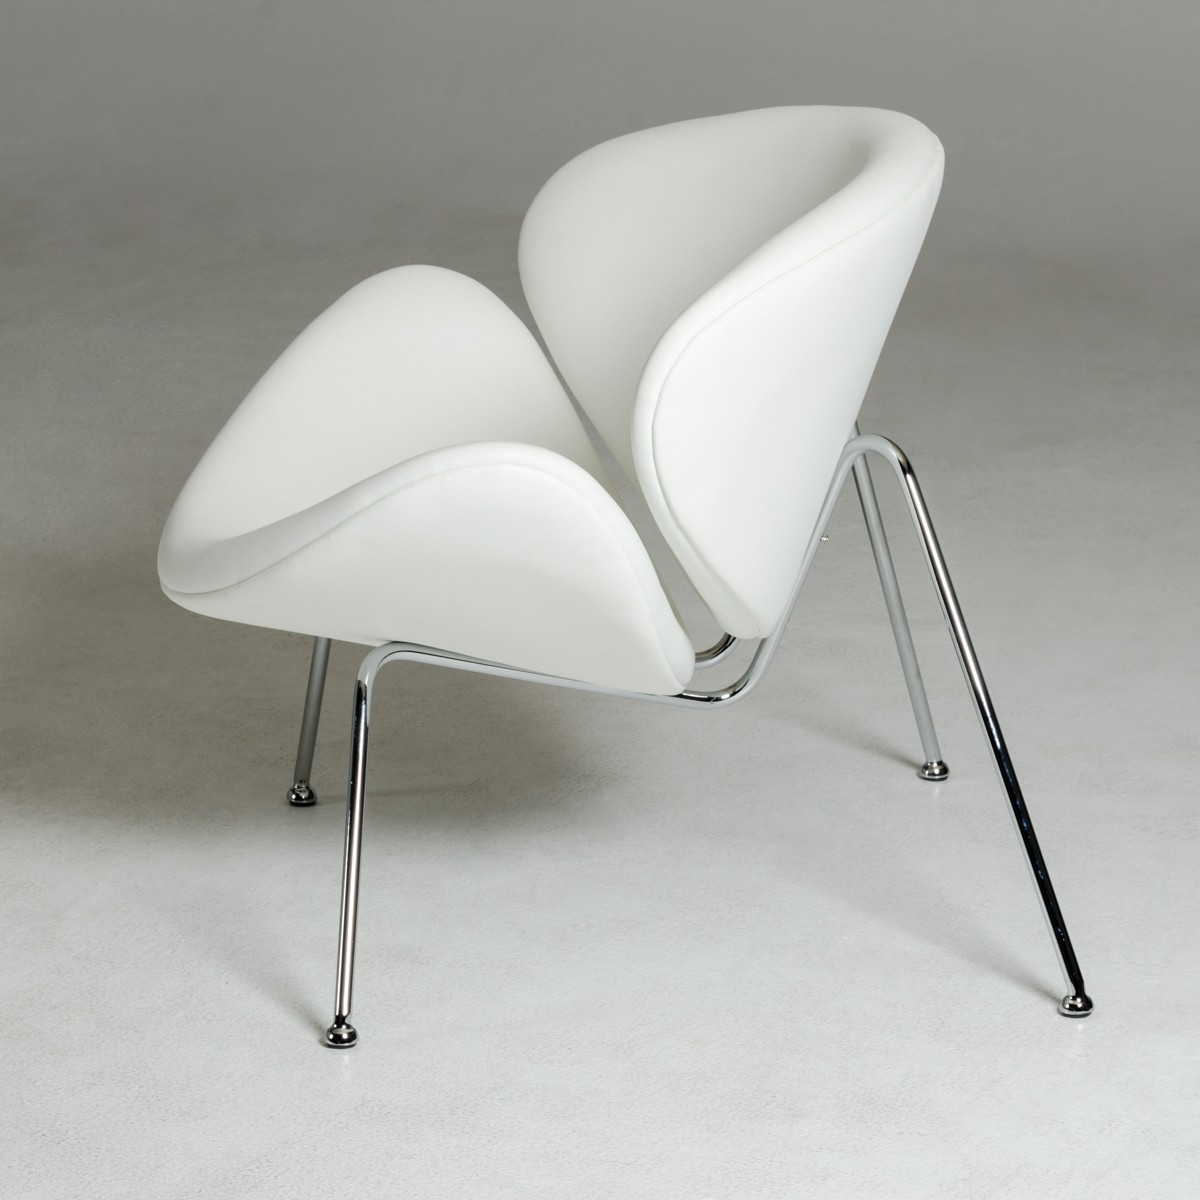 Contemporary White Leatherette Stainless Steel Legs Chair